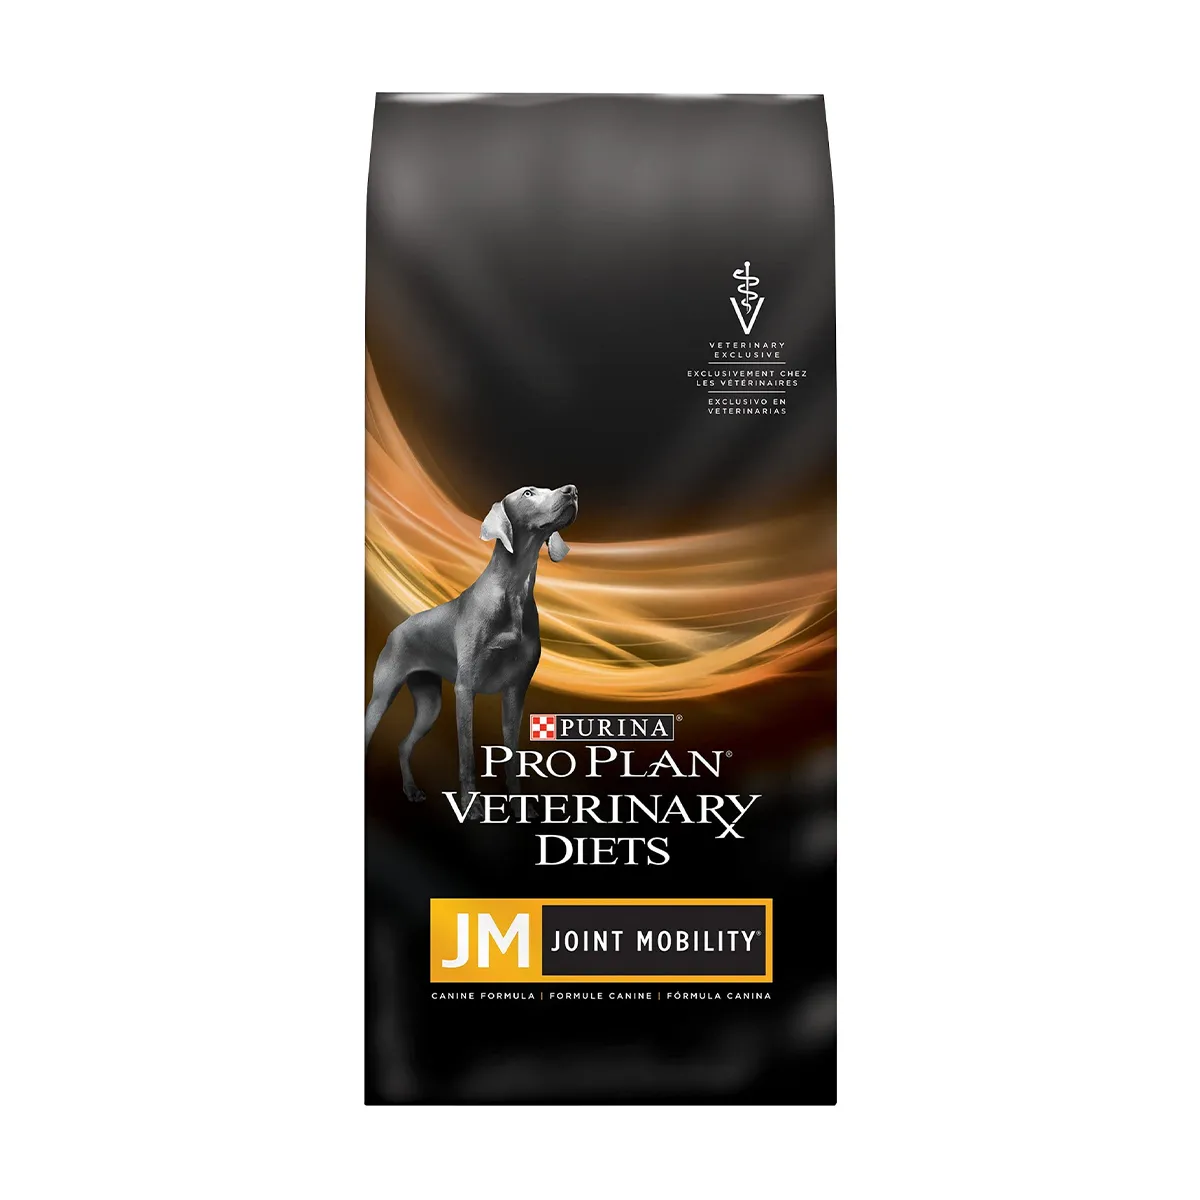 purina-pro-plan-joint-mobility.jpg